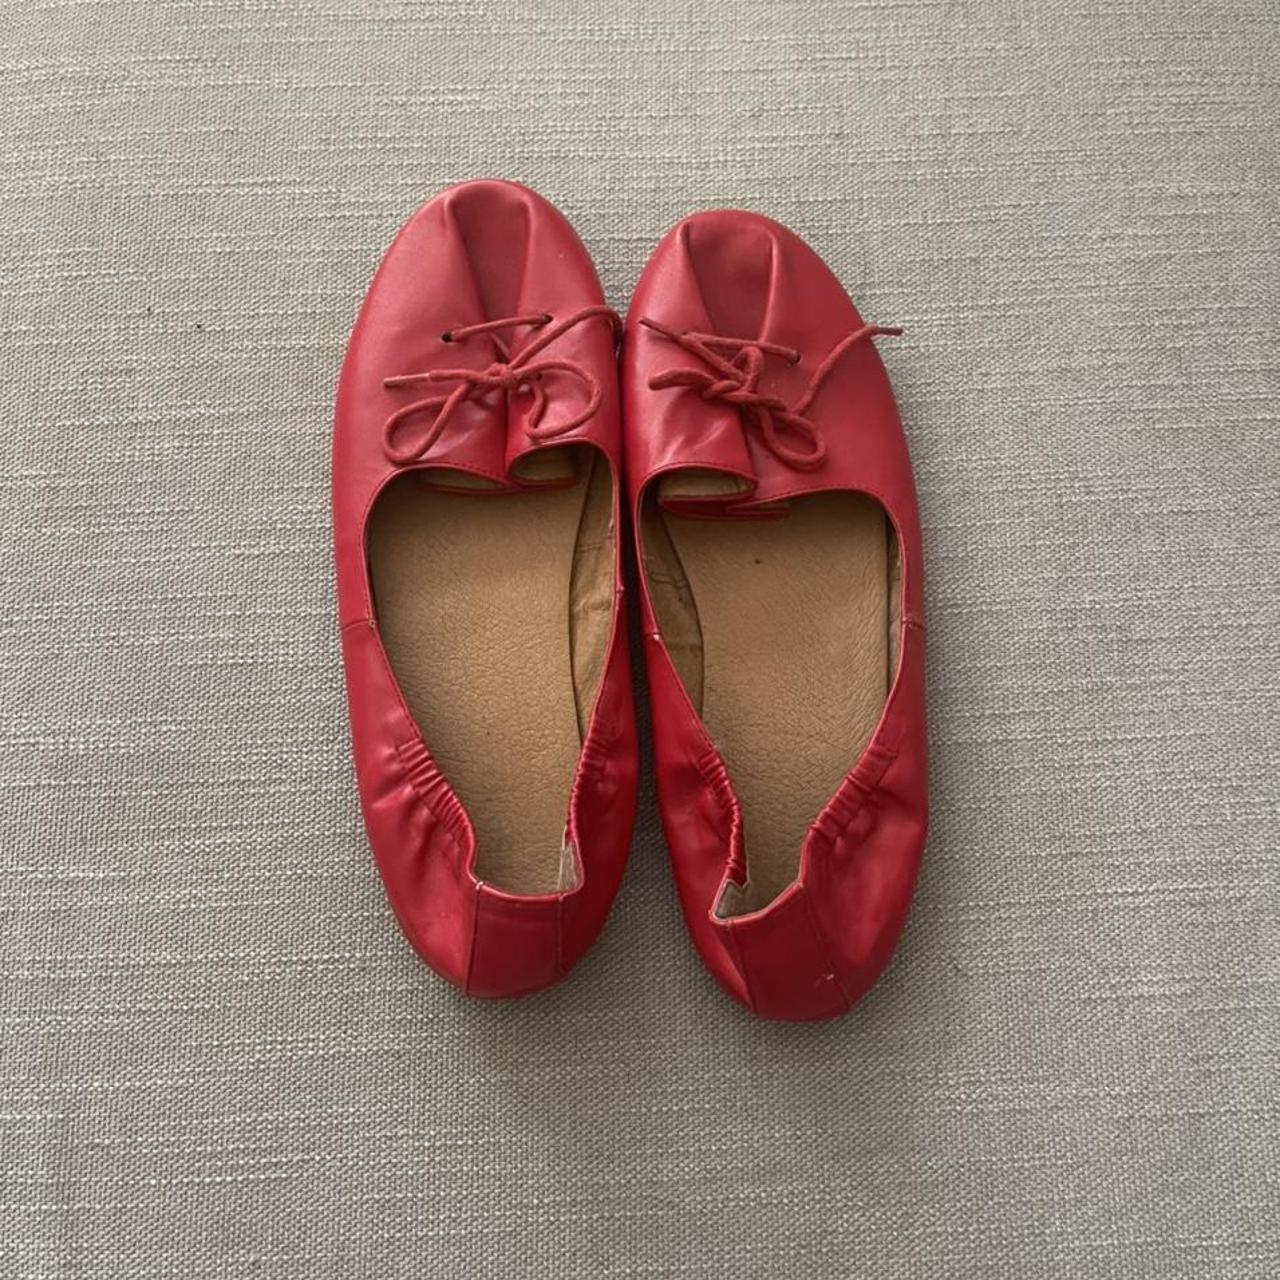 Women's Red and Burgundy Sandals | Depop